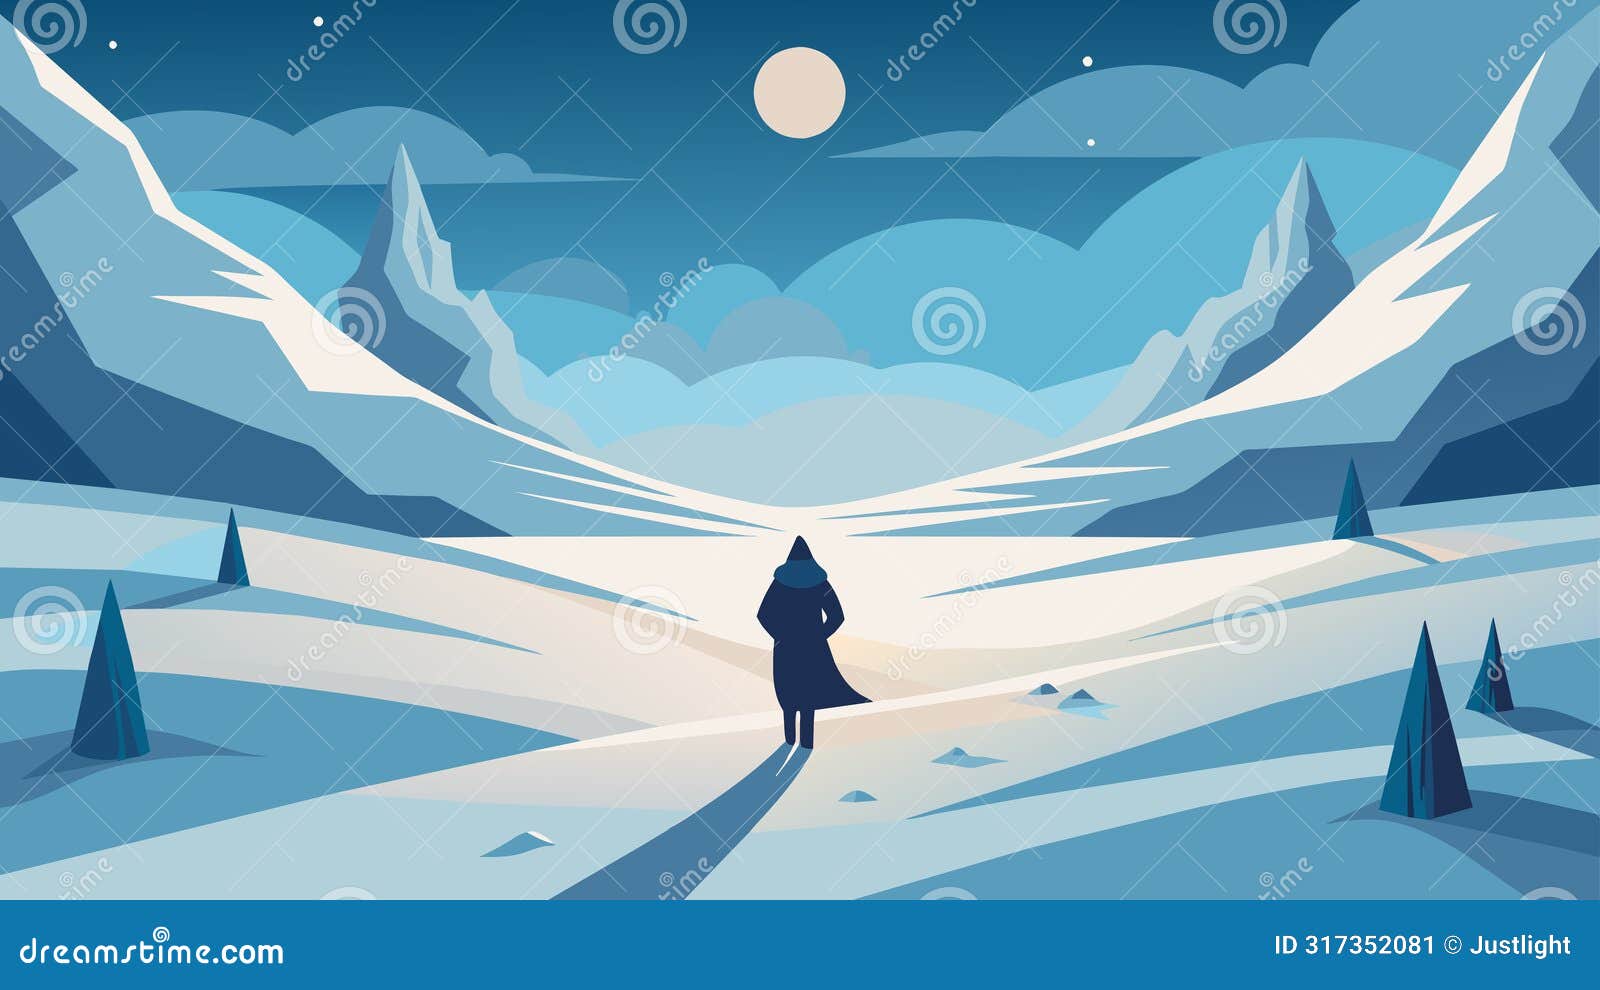 a snowy landscape with a lone figure peacefully walking through embodying the calm of stoicism in the face of harsh